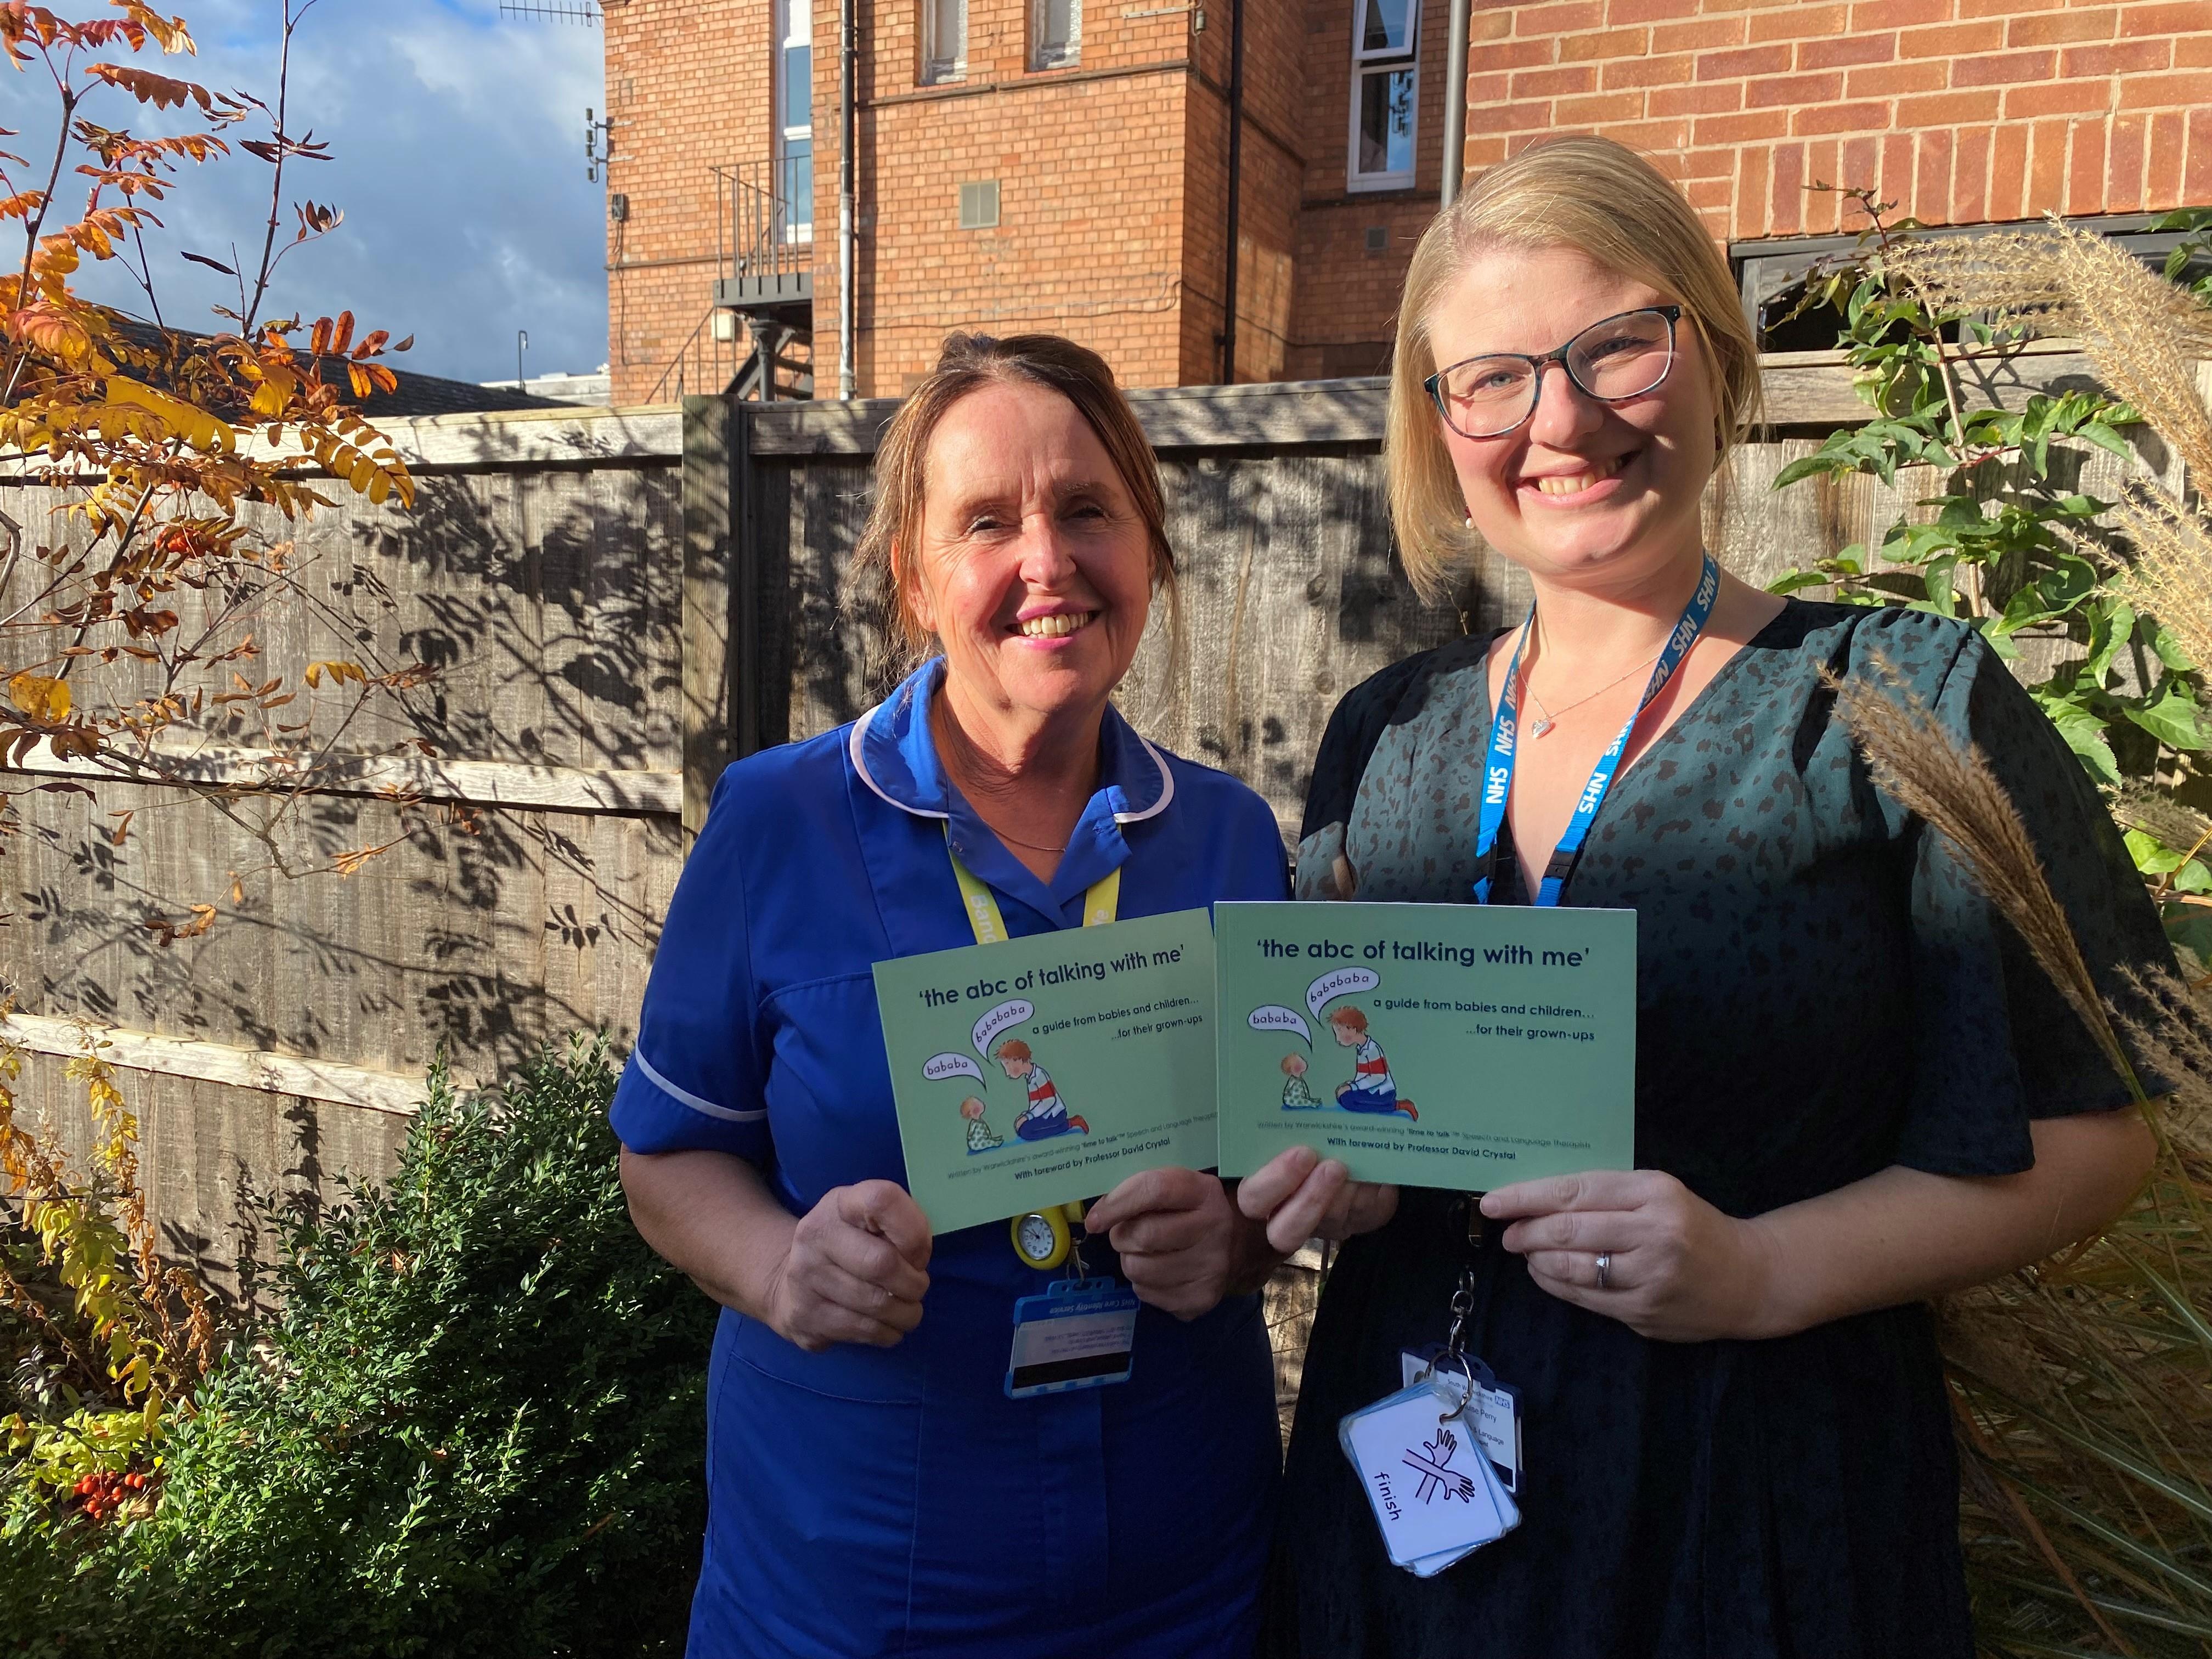 Photograph of two NHS holding books titled "the ABC of talking to me"